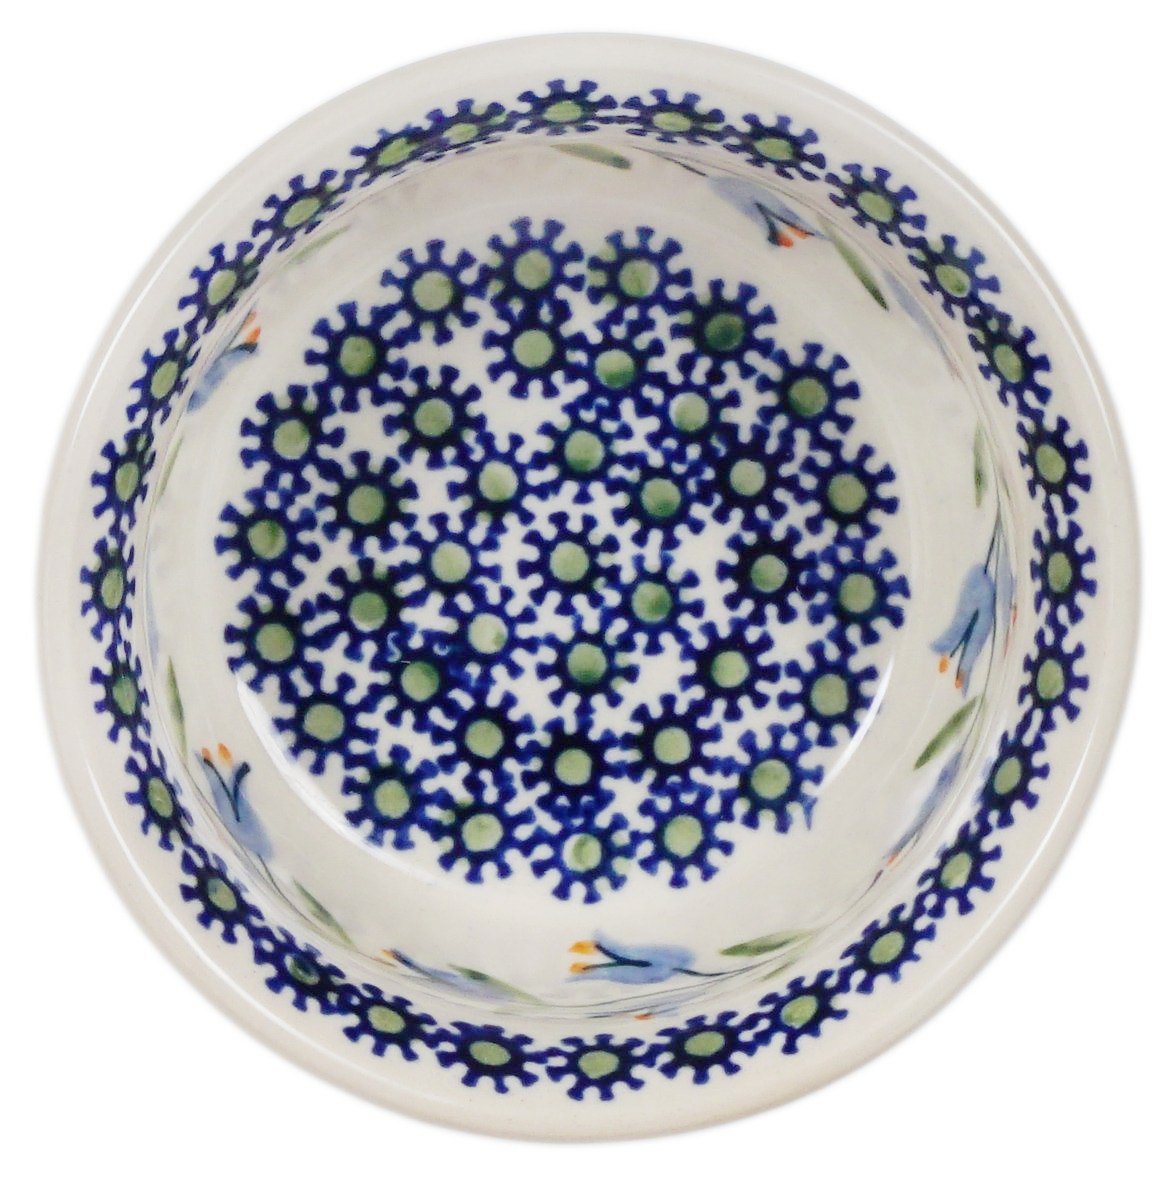 Polish Pottery - 4.5 Bowls - Lily of the Valley - The Polish Pottery Outlet